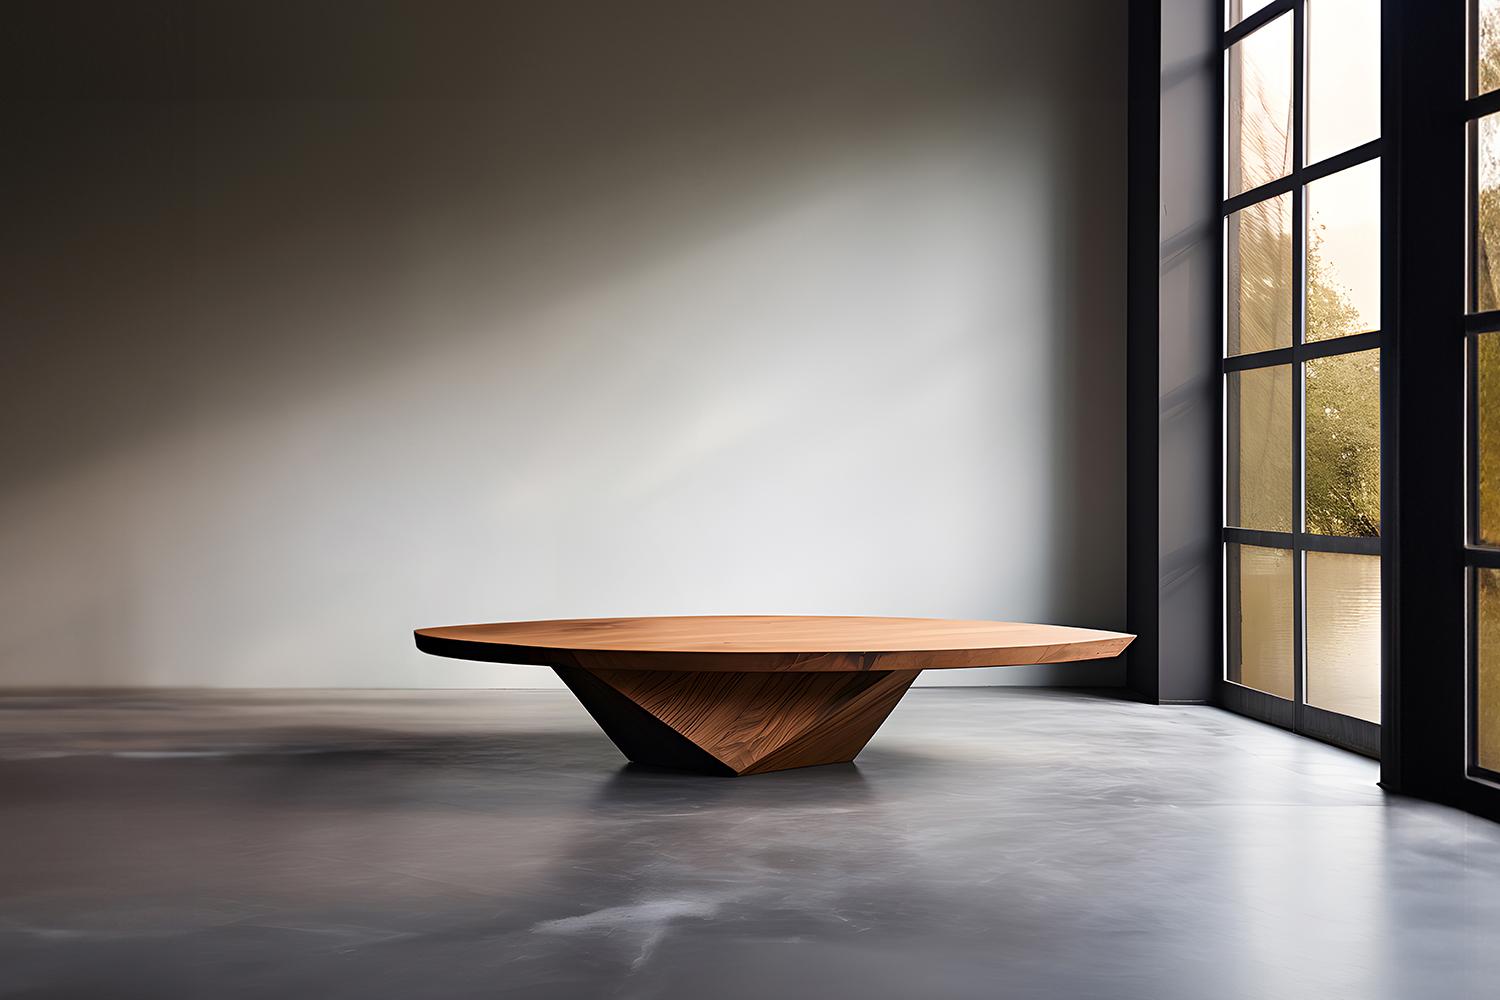 Round Coffee Table Made of Solid Wood, Center Table Solace S9 by Joel Escalona


The Solace table series, designed by Joel Escalona, is a furniture collection that exudes balance and presence, thanks to its sensuous, dense, and irregular shapes.